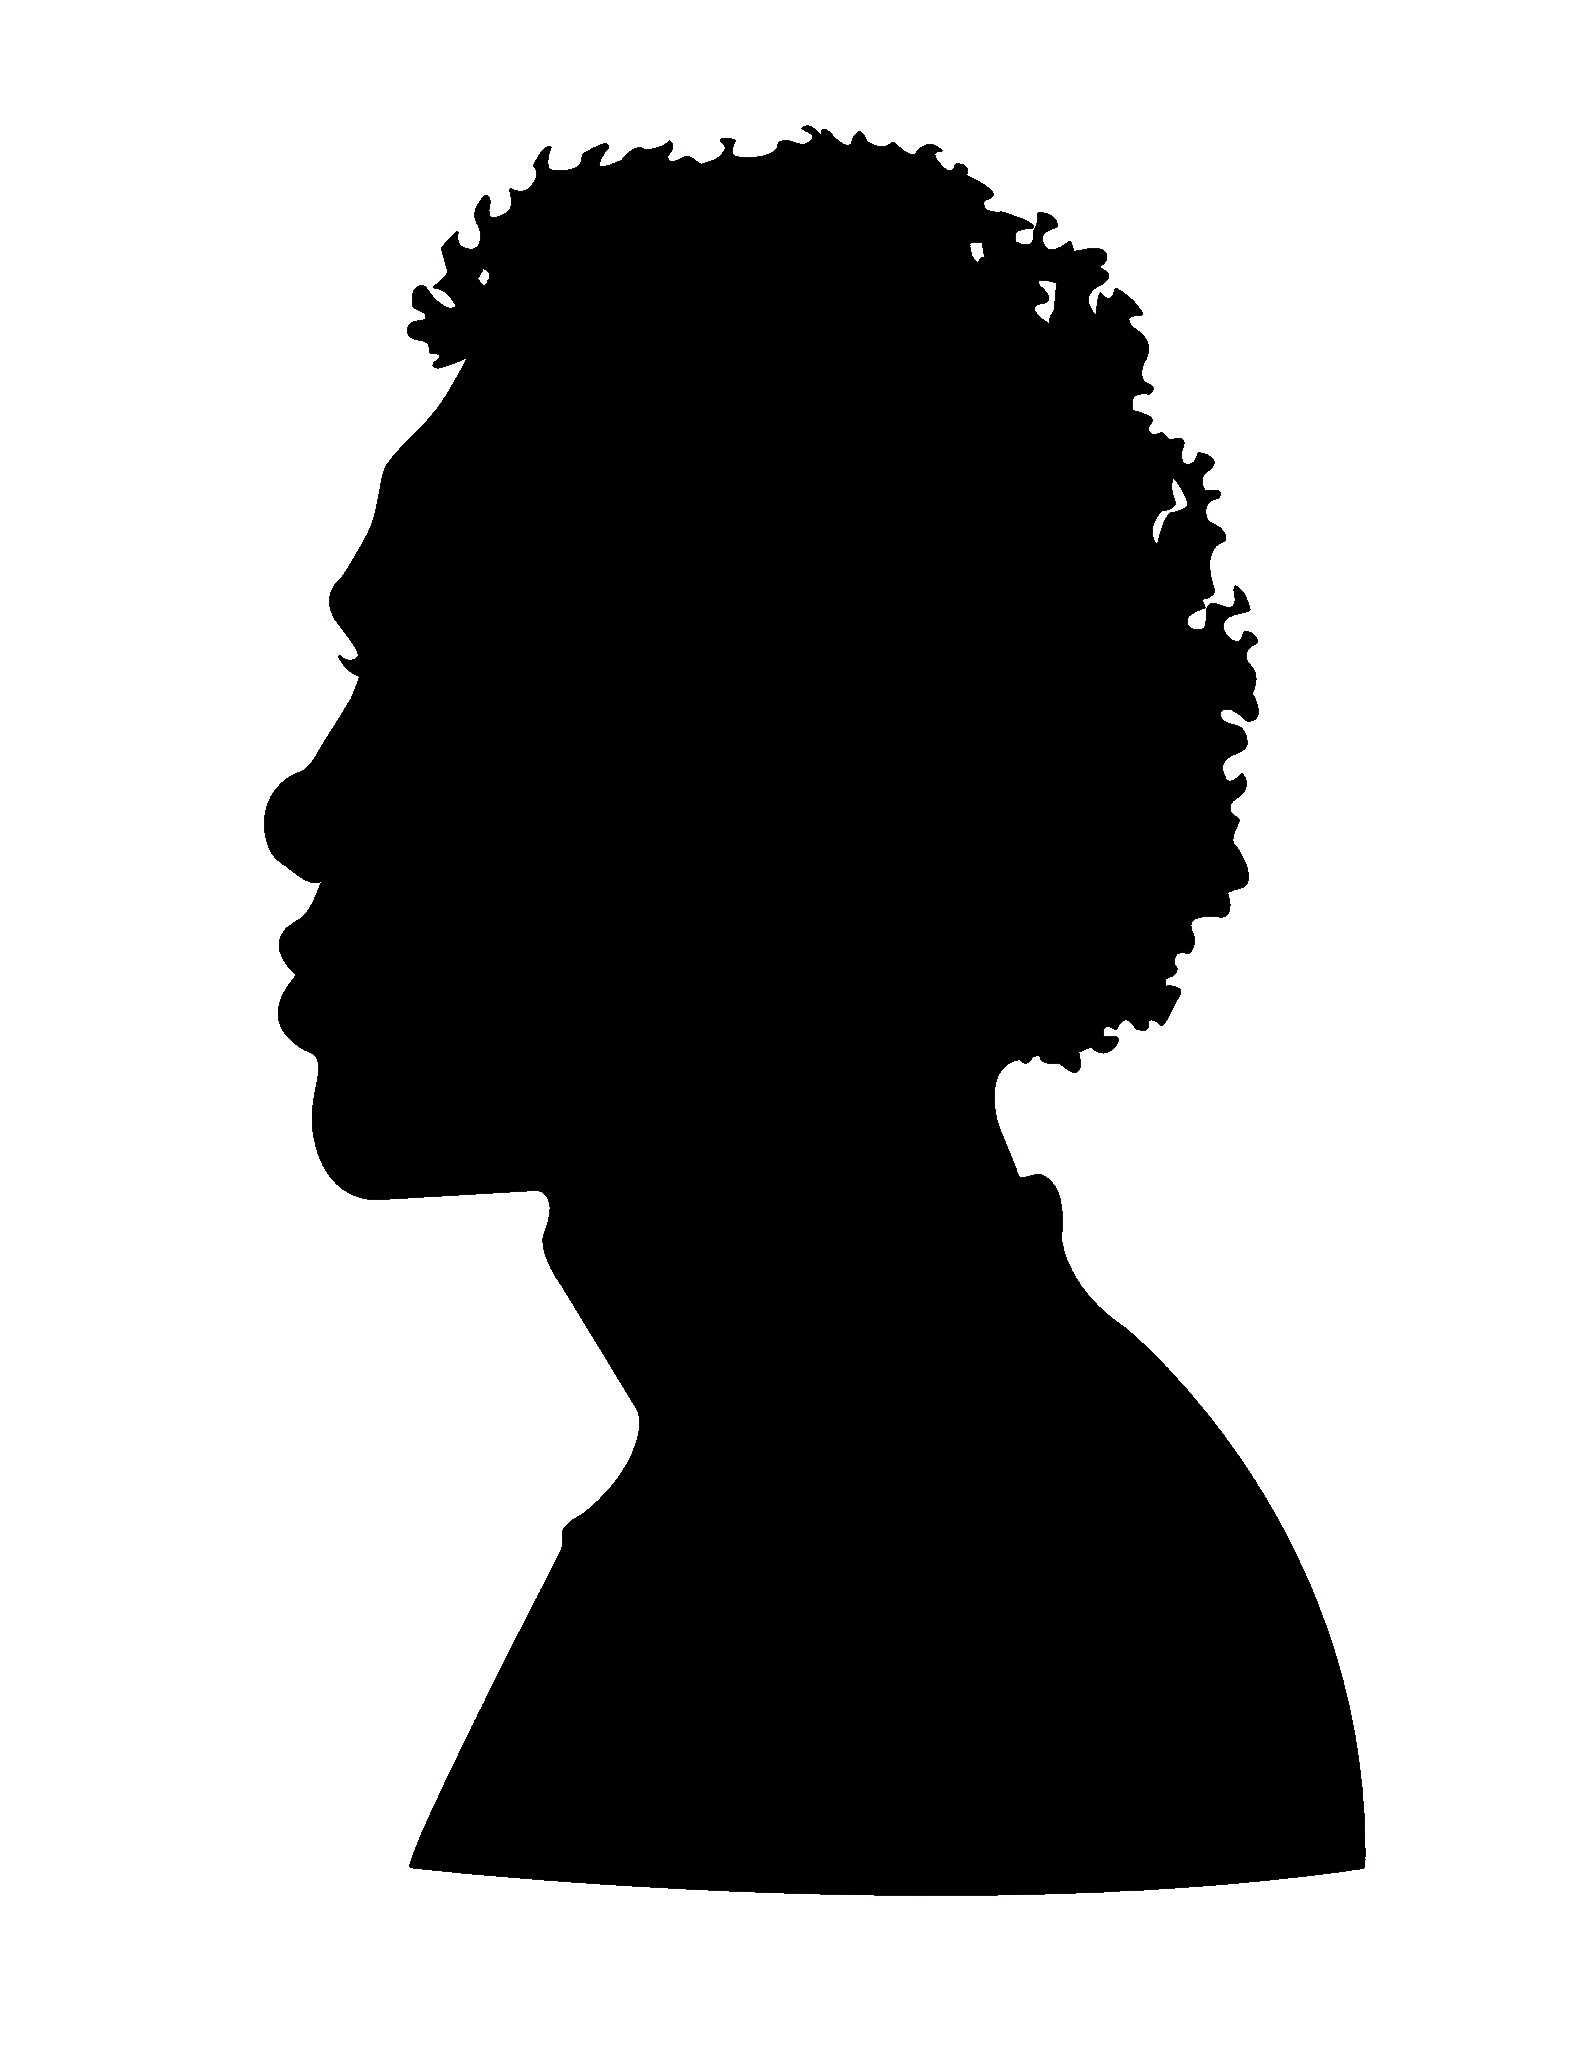 A traditional side profile, silhouetted portrait of the King of Dahomey, Ahosu Houegbadja.